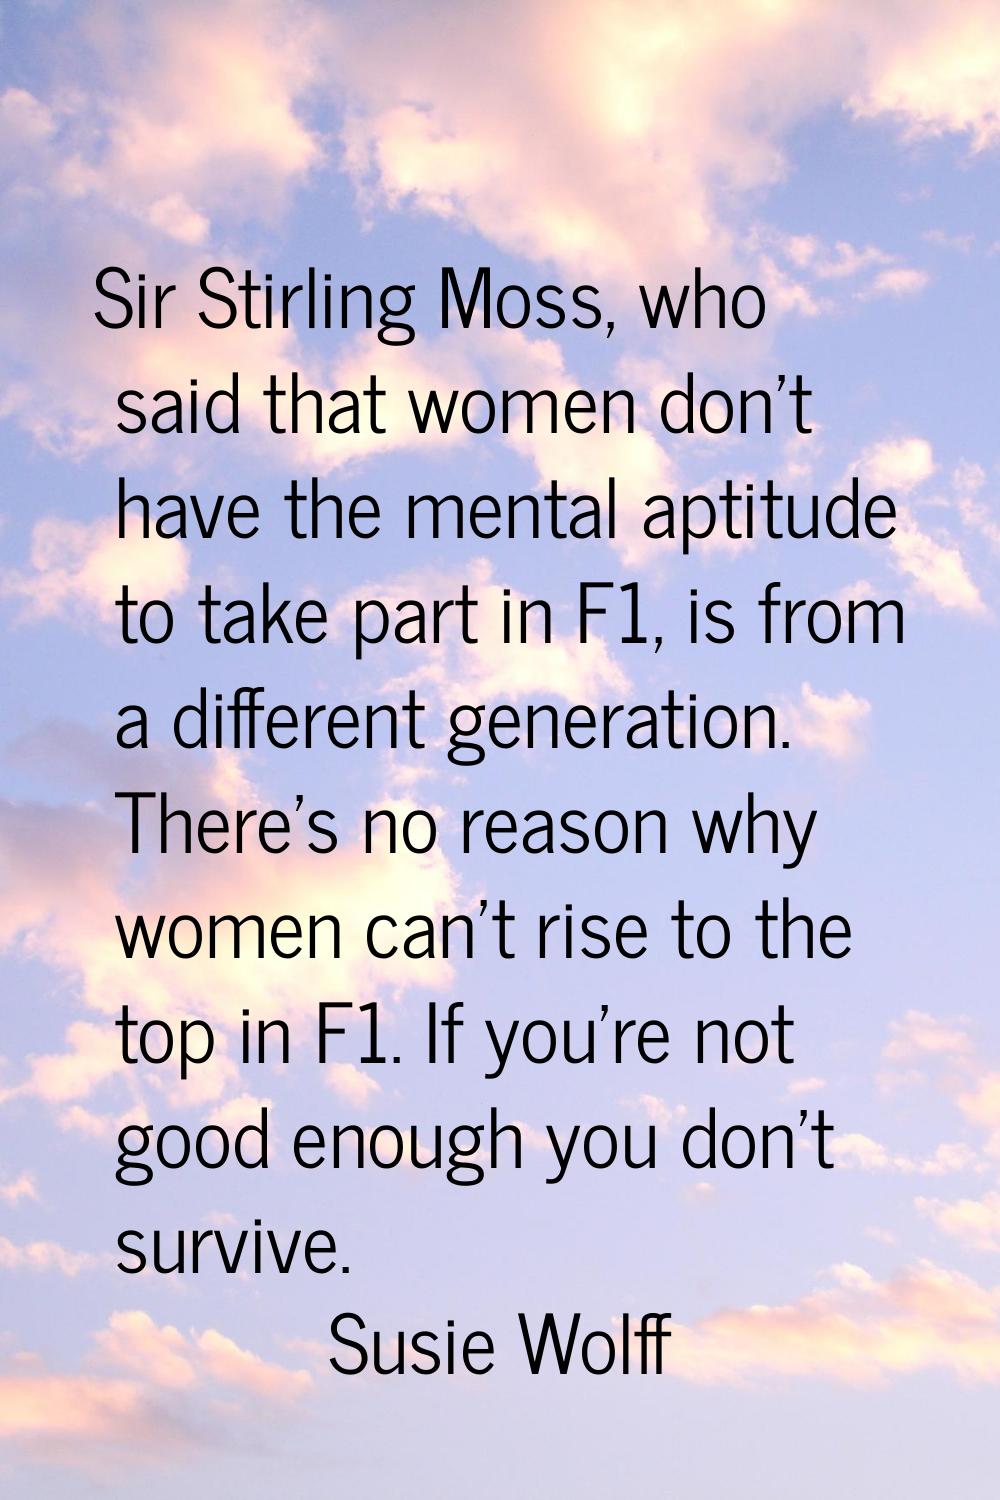 Sir Stirling Moss, who said that women don't have the mental aptitude to take part in F1, is from a